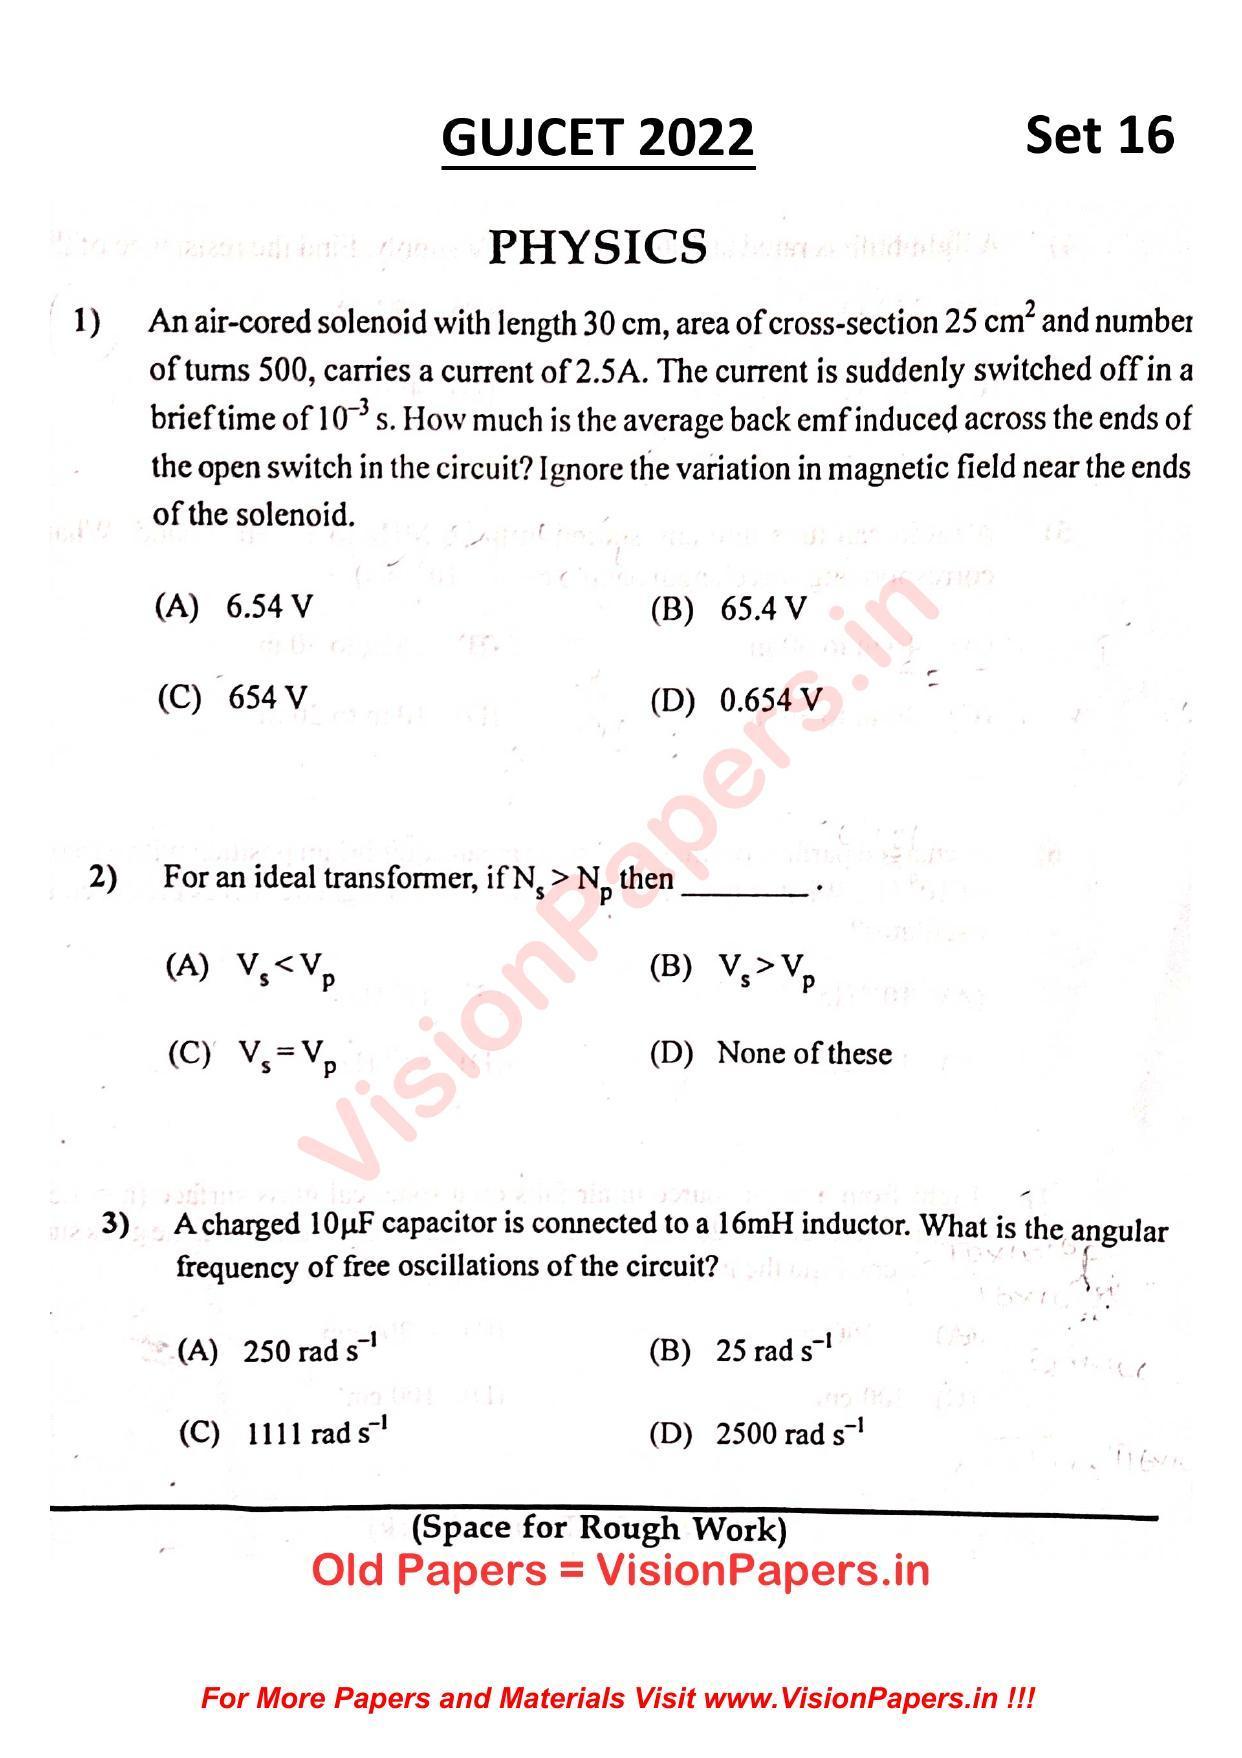 GUJCET Physics 2022 Question Paper - Page 1